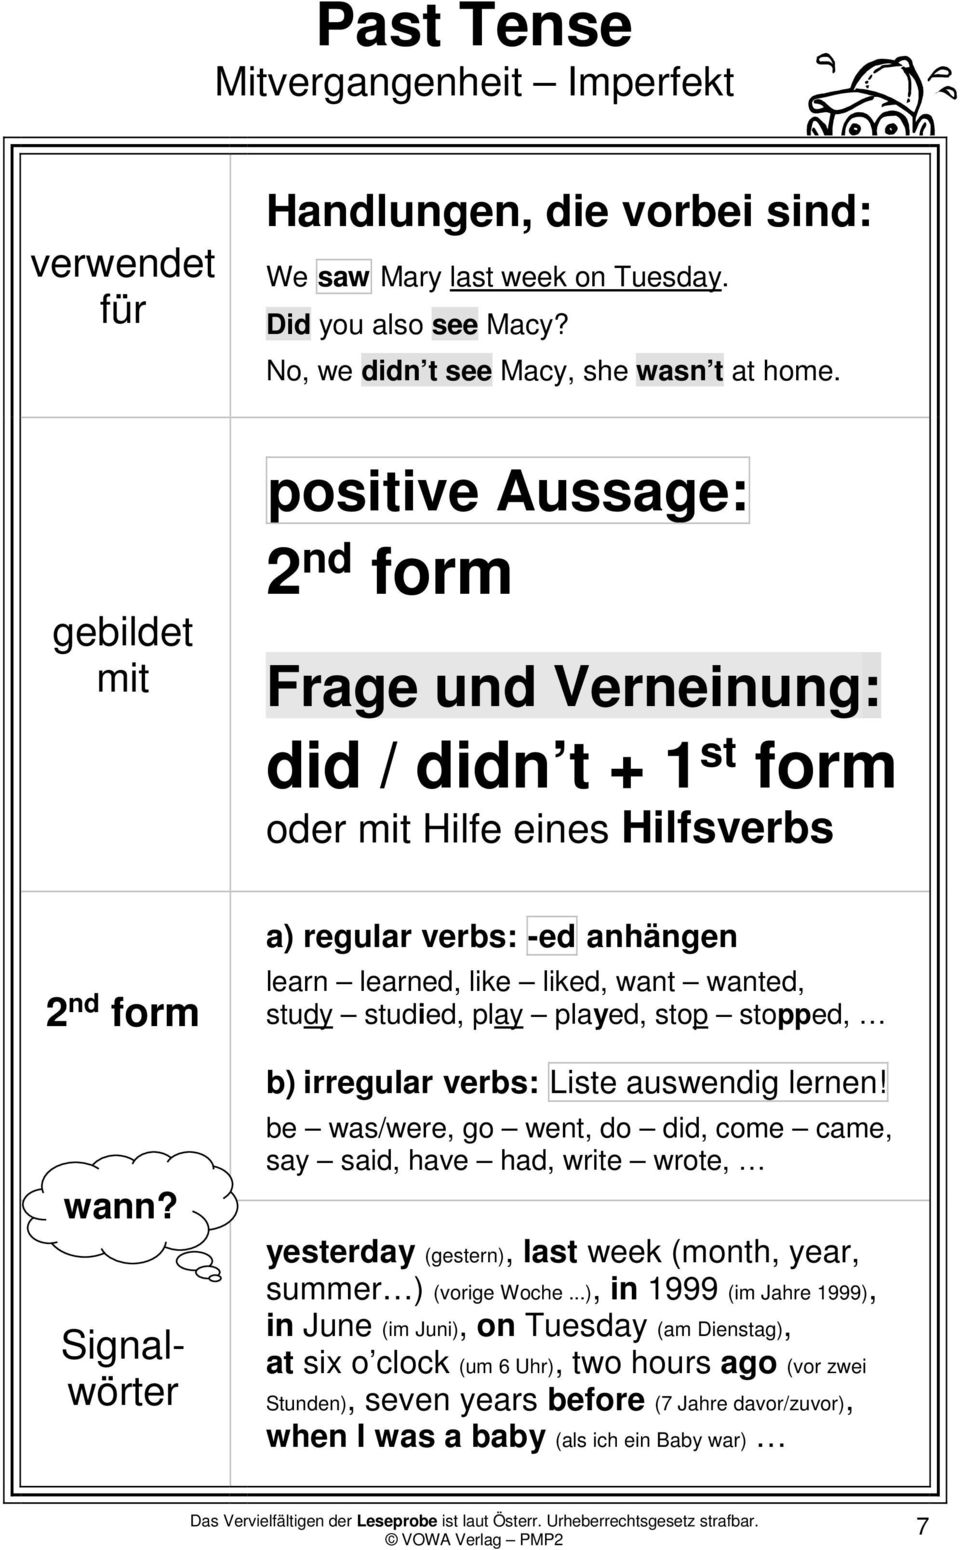 Signalwörter a) regular verbs: -ed anhängen learn learned, like liked, want wanted, study studied, play played, stop stopped, b) irregular verbs: Liste auswendig lernen!